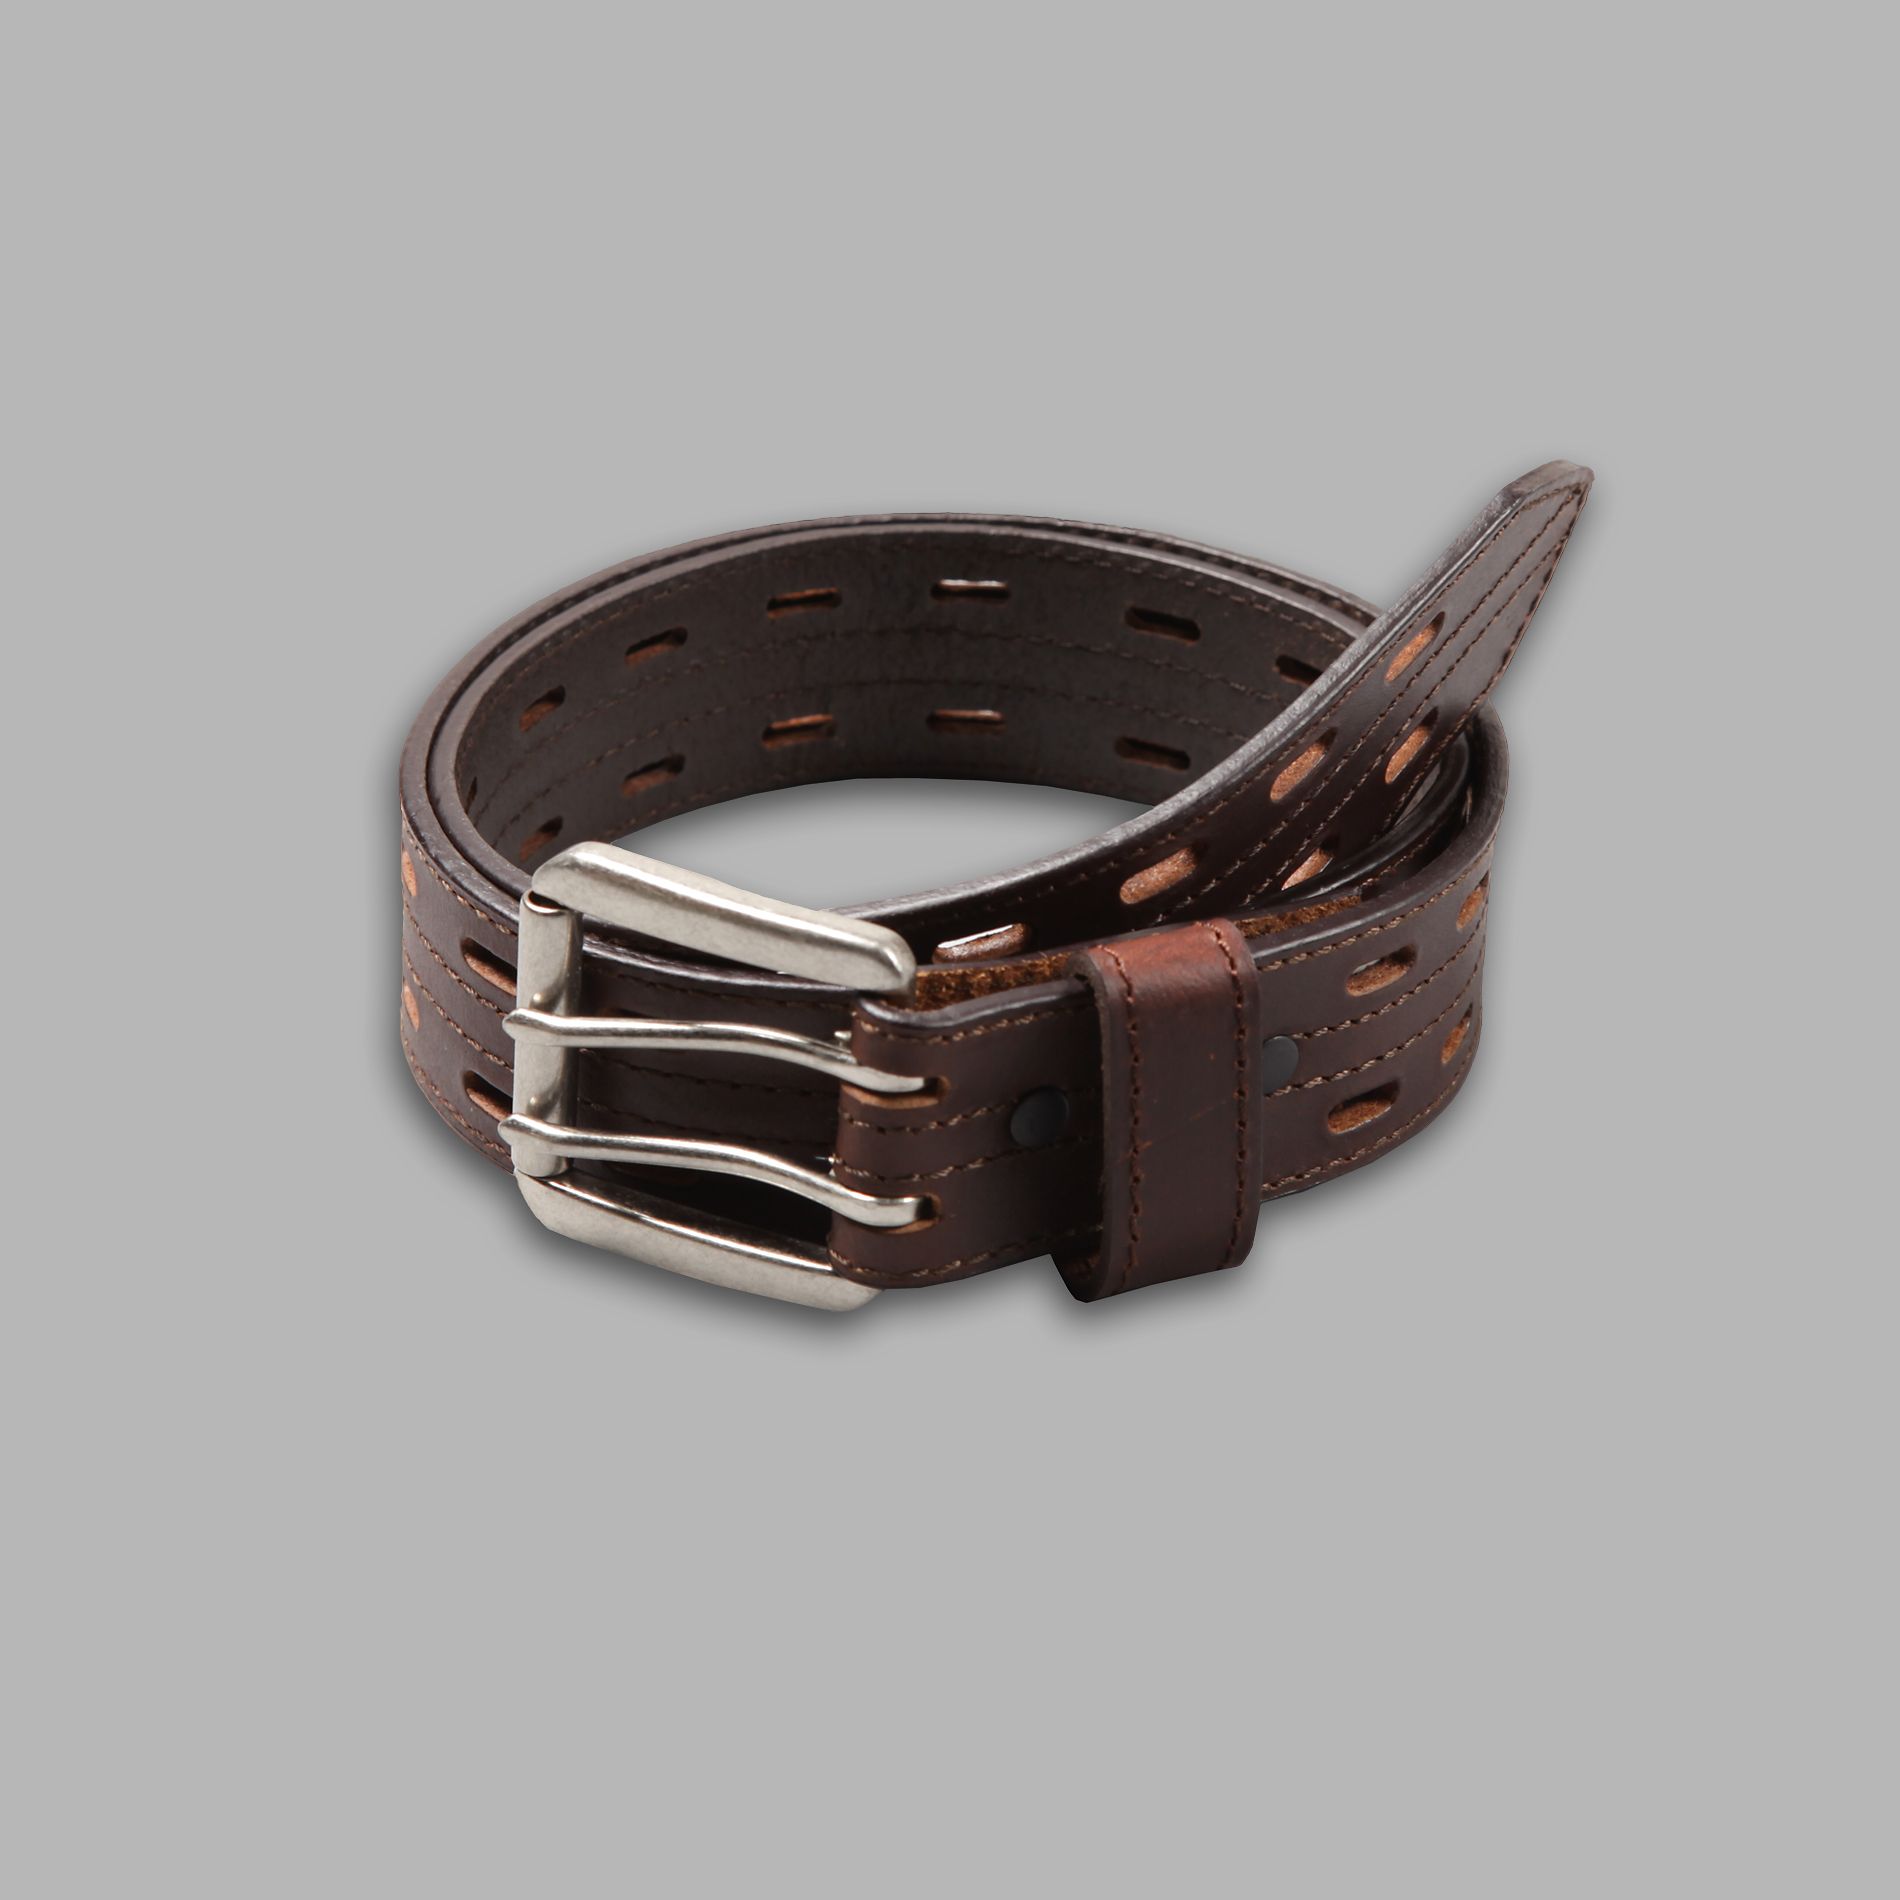 Route 66 Men's Double Tang Leather Belt